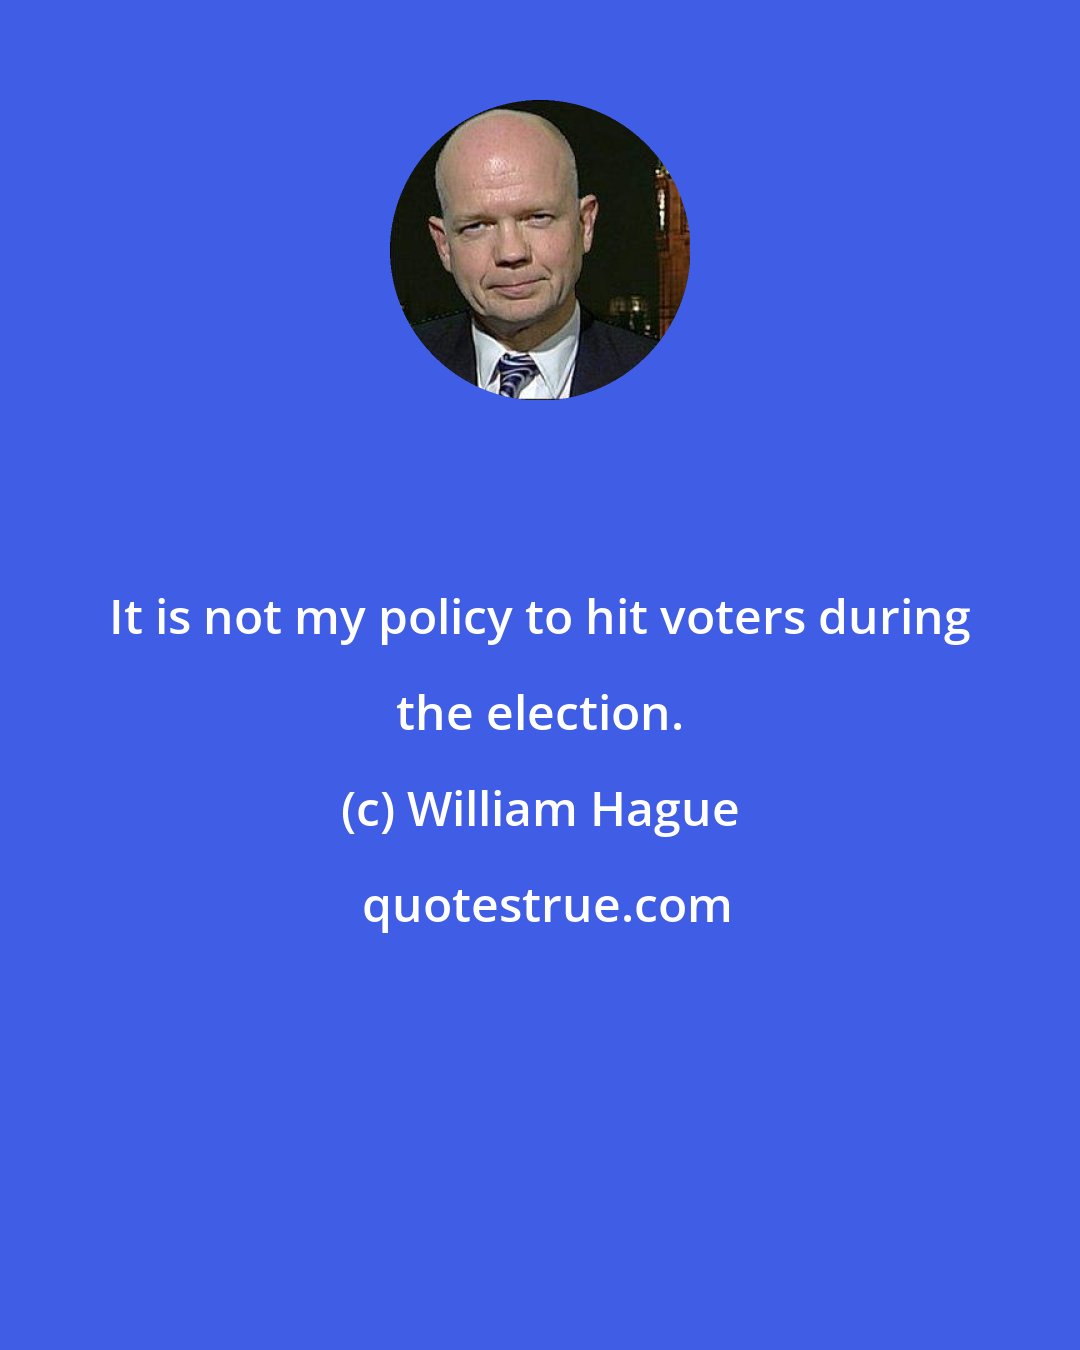 William Hague: It is not my policy to hit voters during the election.